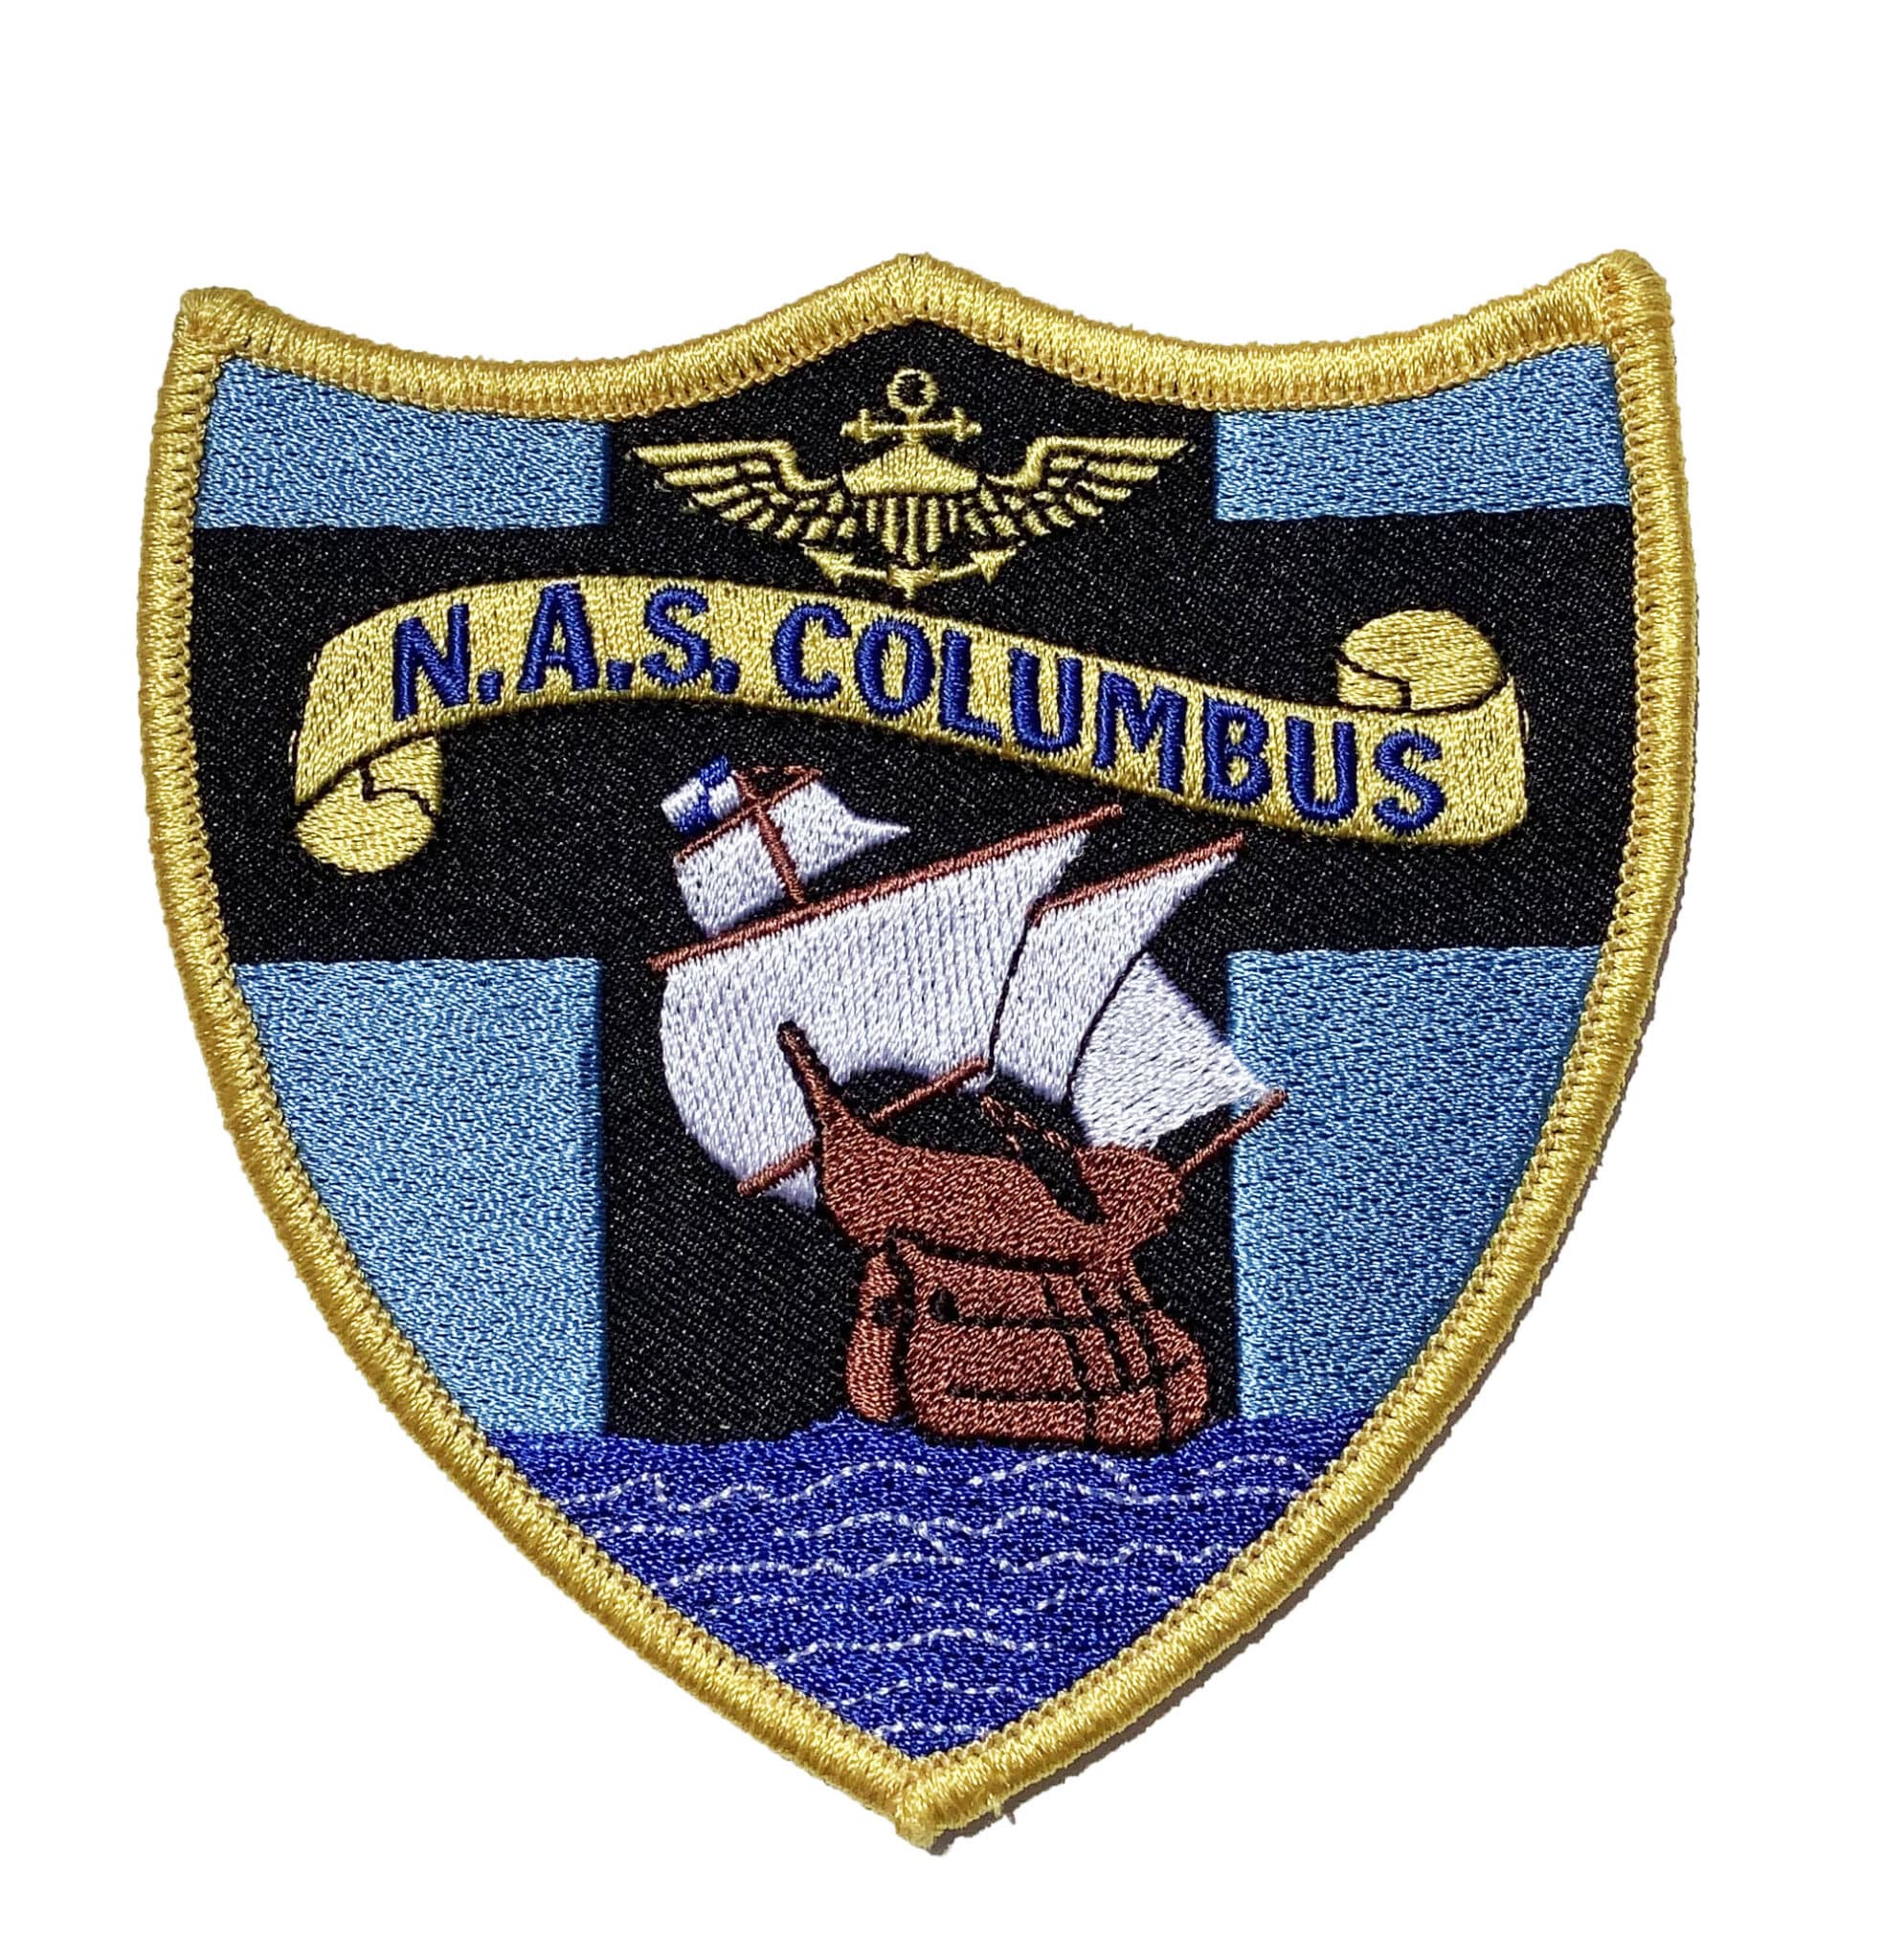 N.A.S. COLUMBUS Patch – Plastic Backing